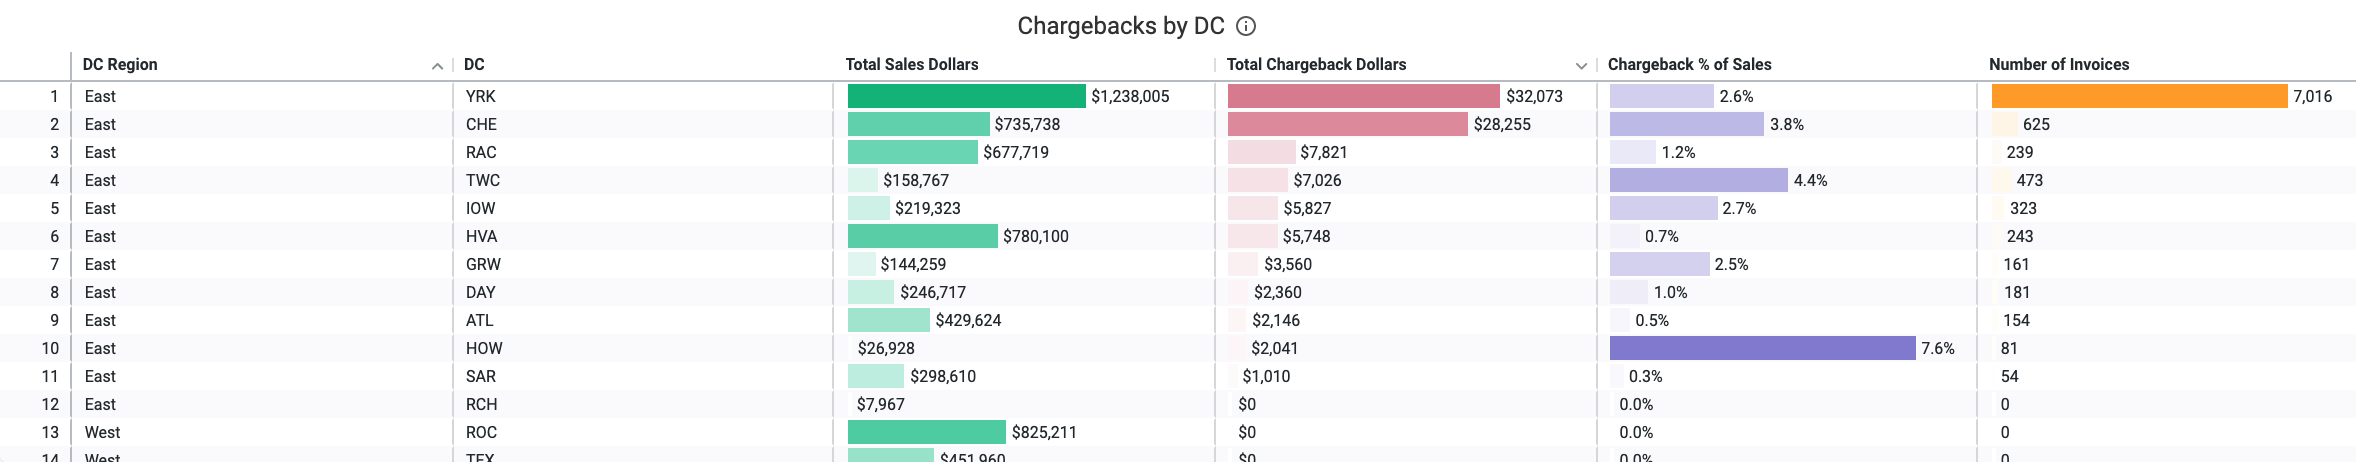 Chargebacks_by_DC.png